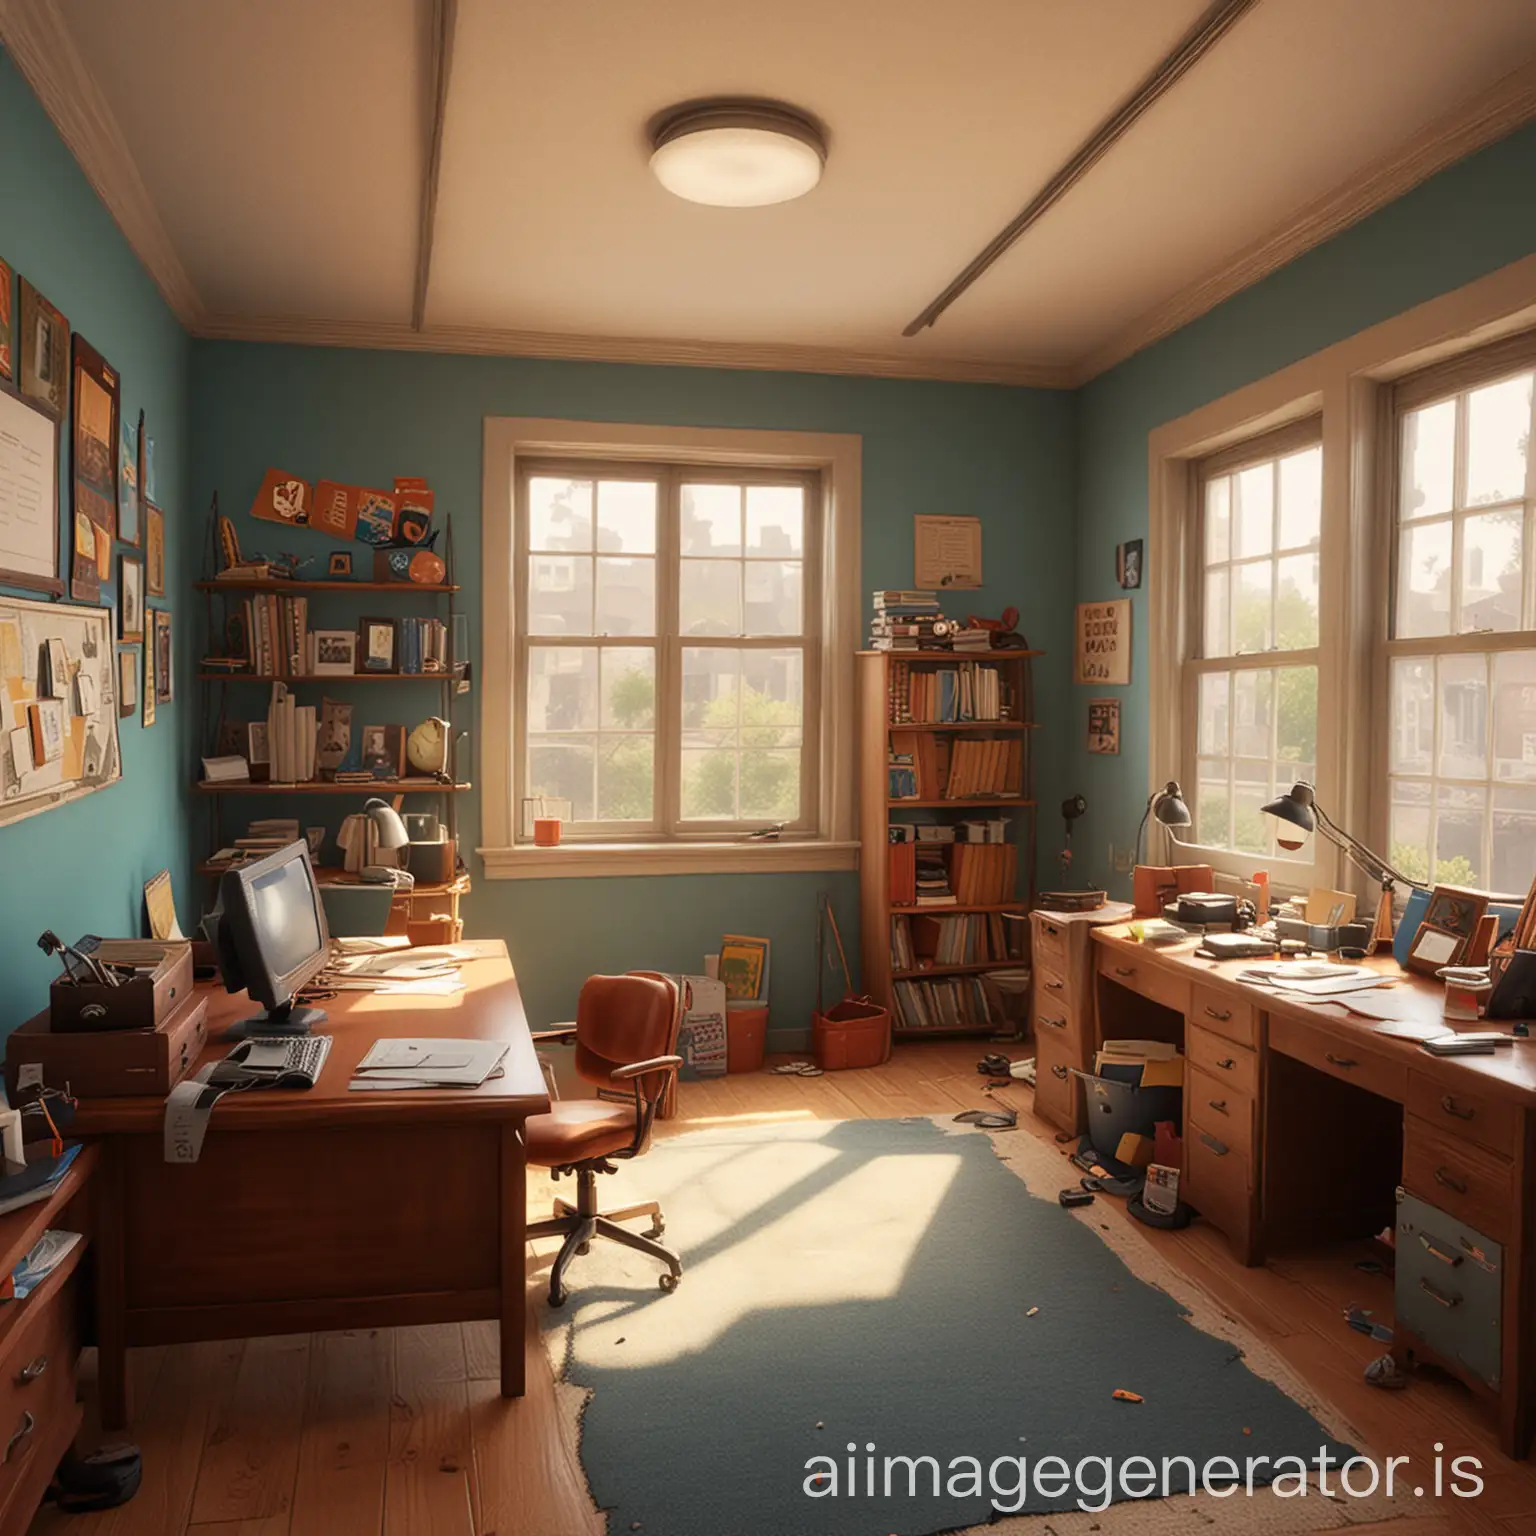 Please help me to generate a Pixar style admission's office room in the school